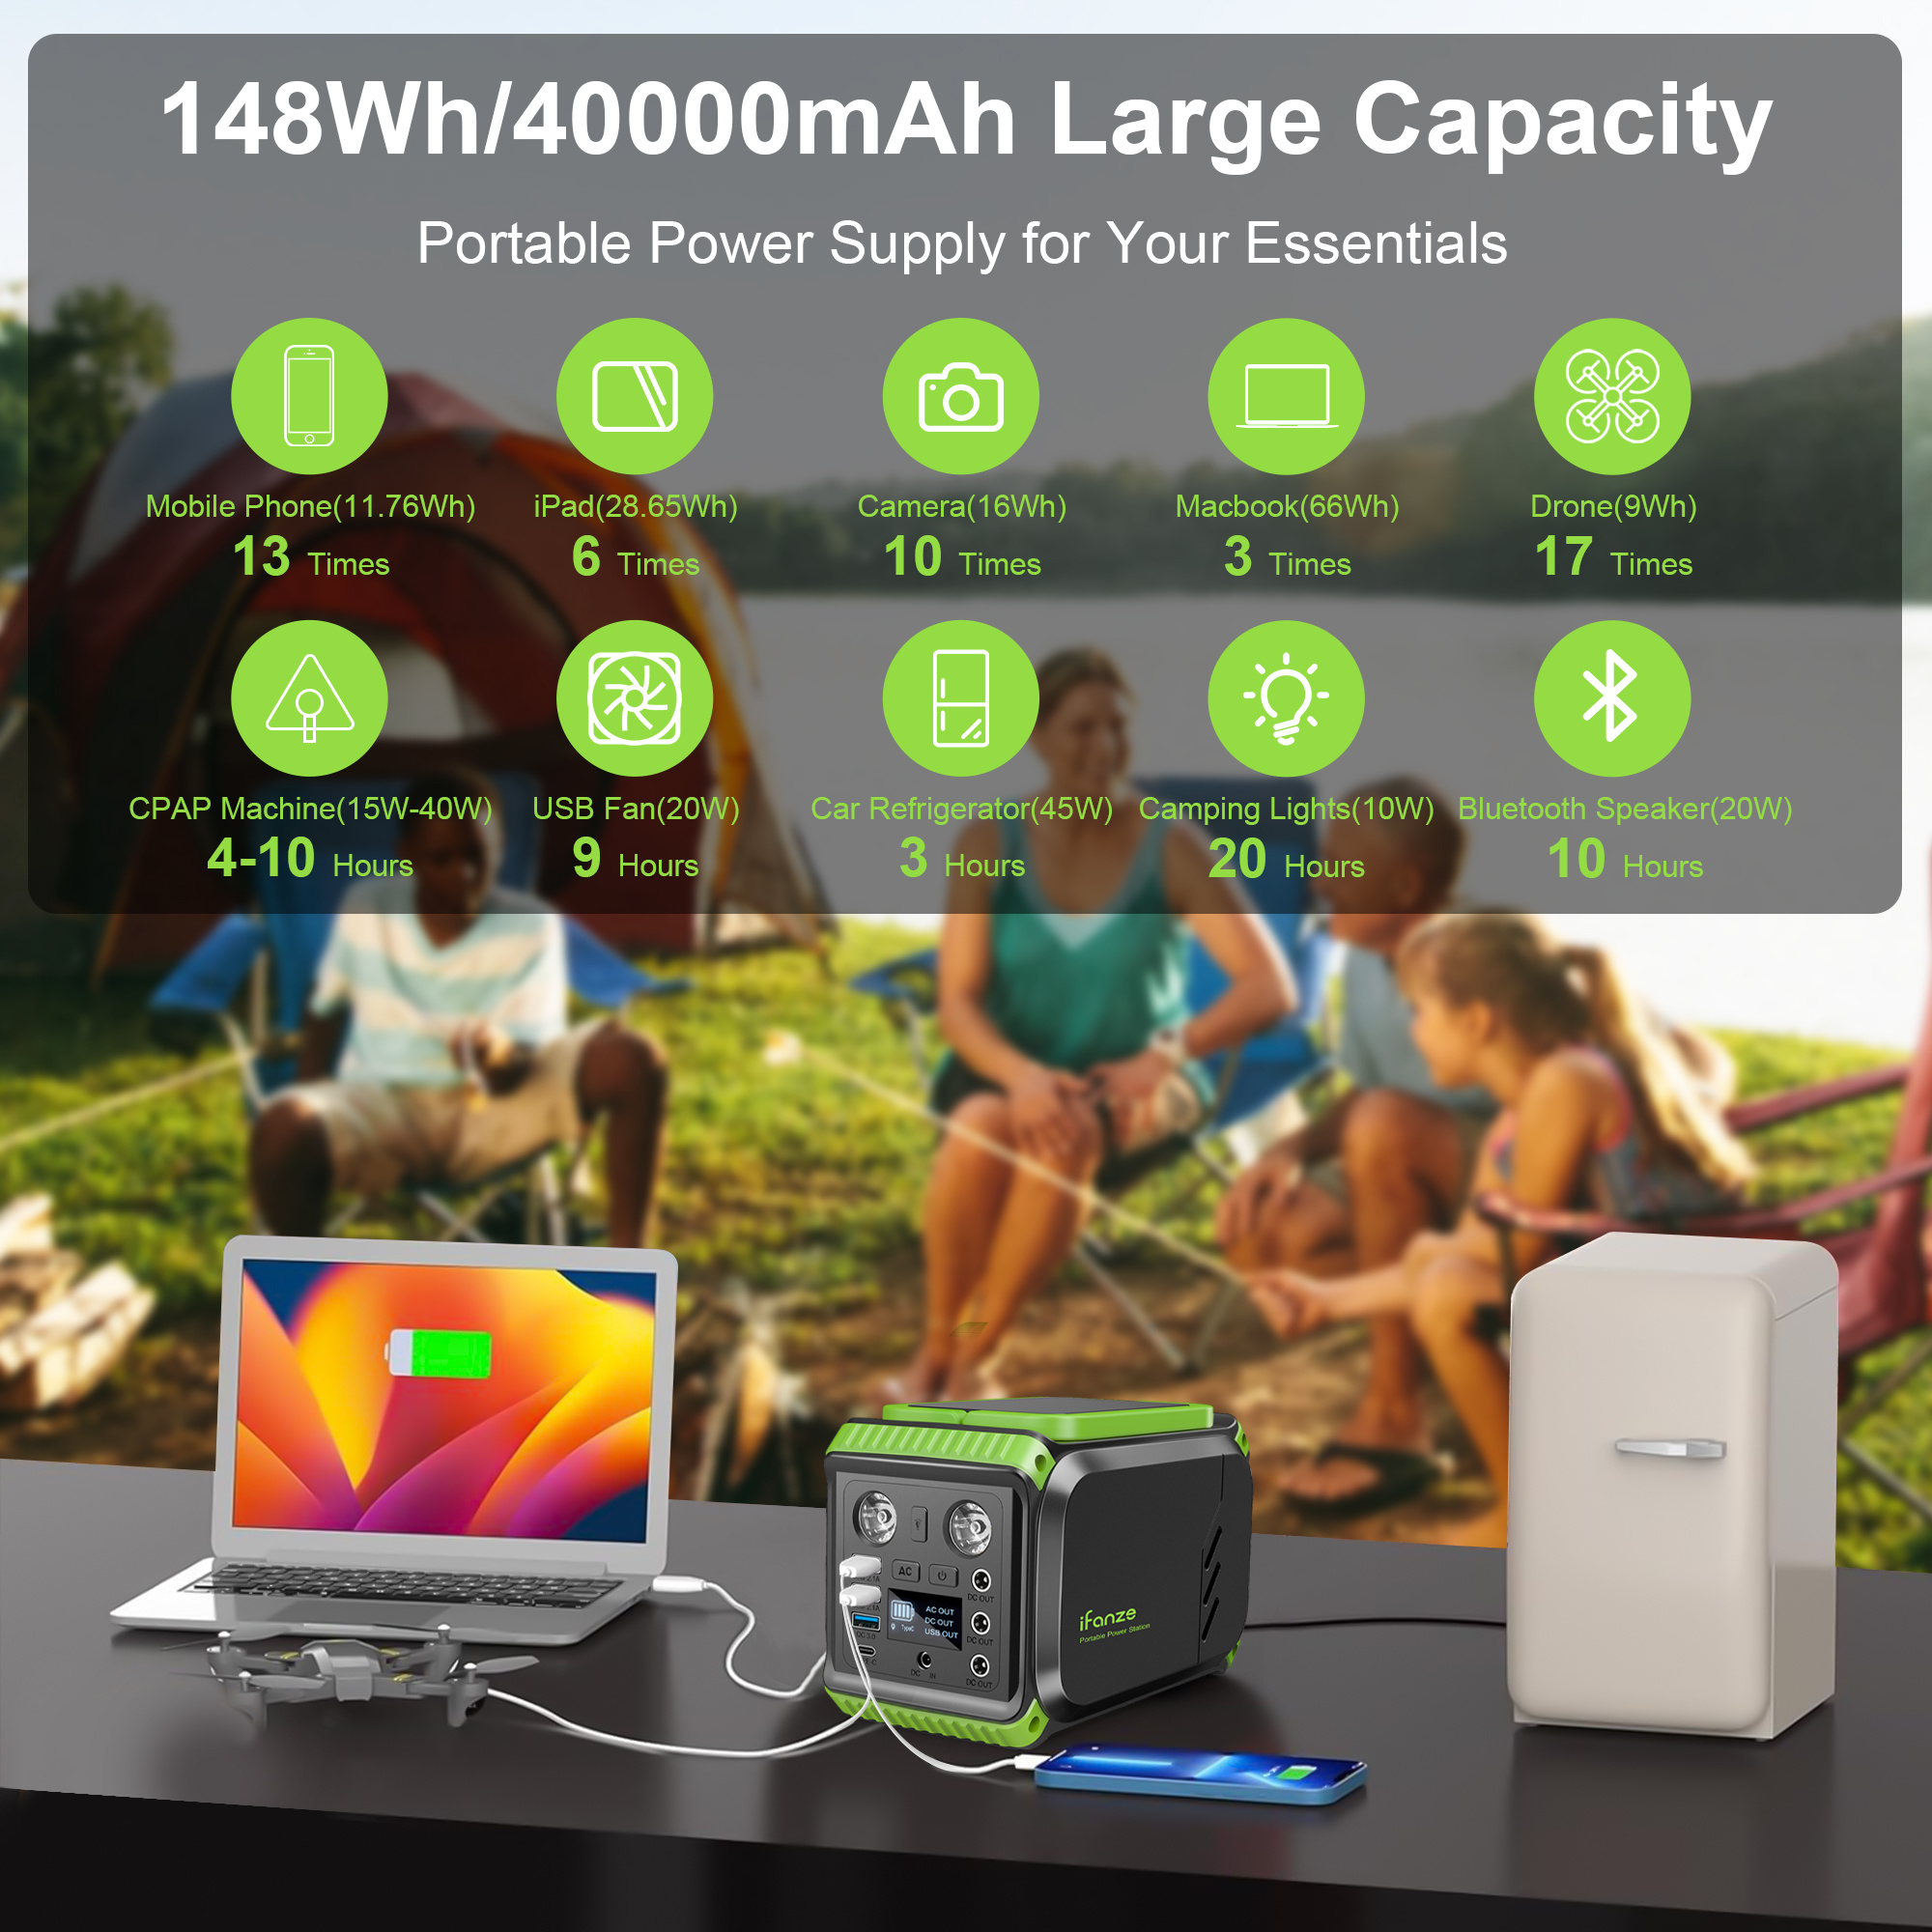 iFanze 200W Portable Power Station, 148Wh 40000mAh Solar Generator Power Supply with 110V AC Outlets & LED Light, Backup Battery for CPAP, Home Emergency, Outdoor Camping, Road Travel, Hunting, RV - image 3 of 12